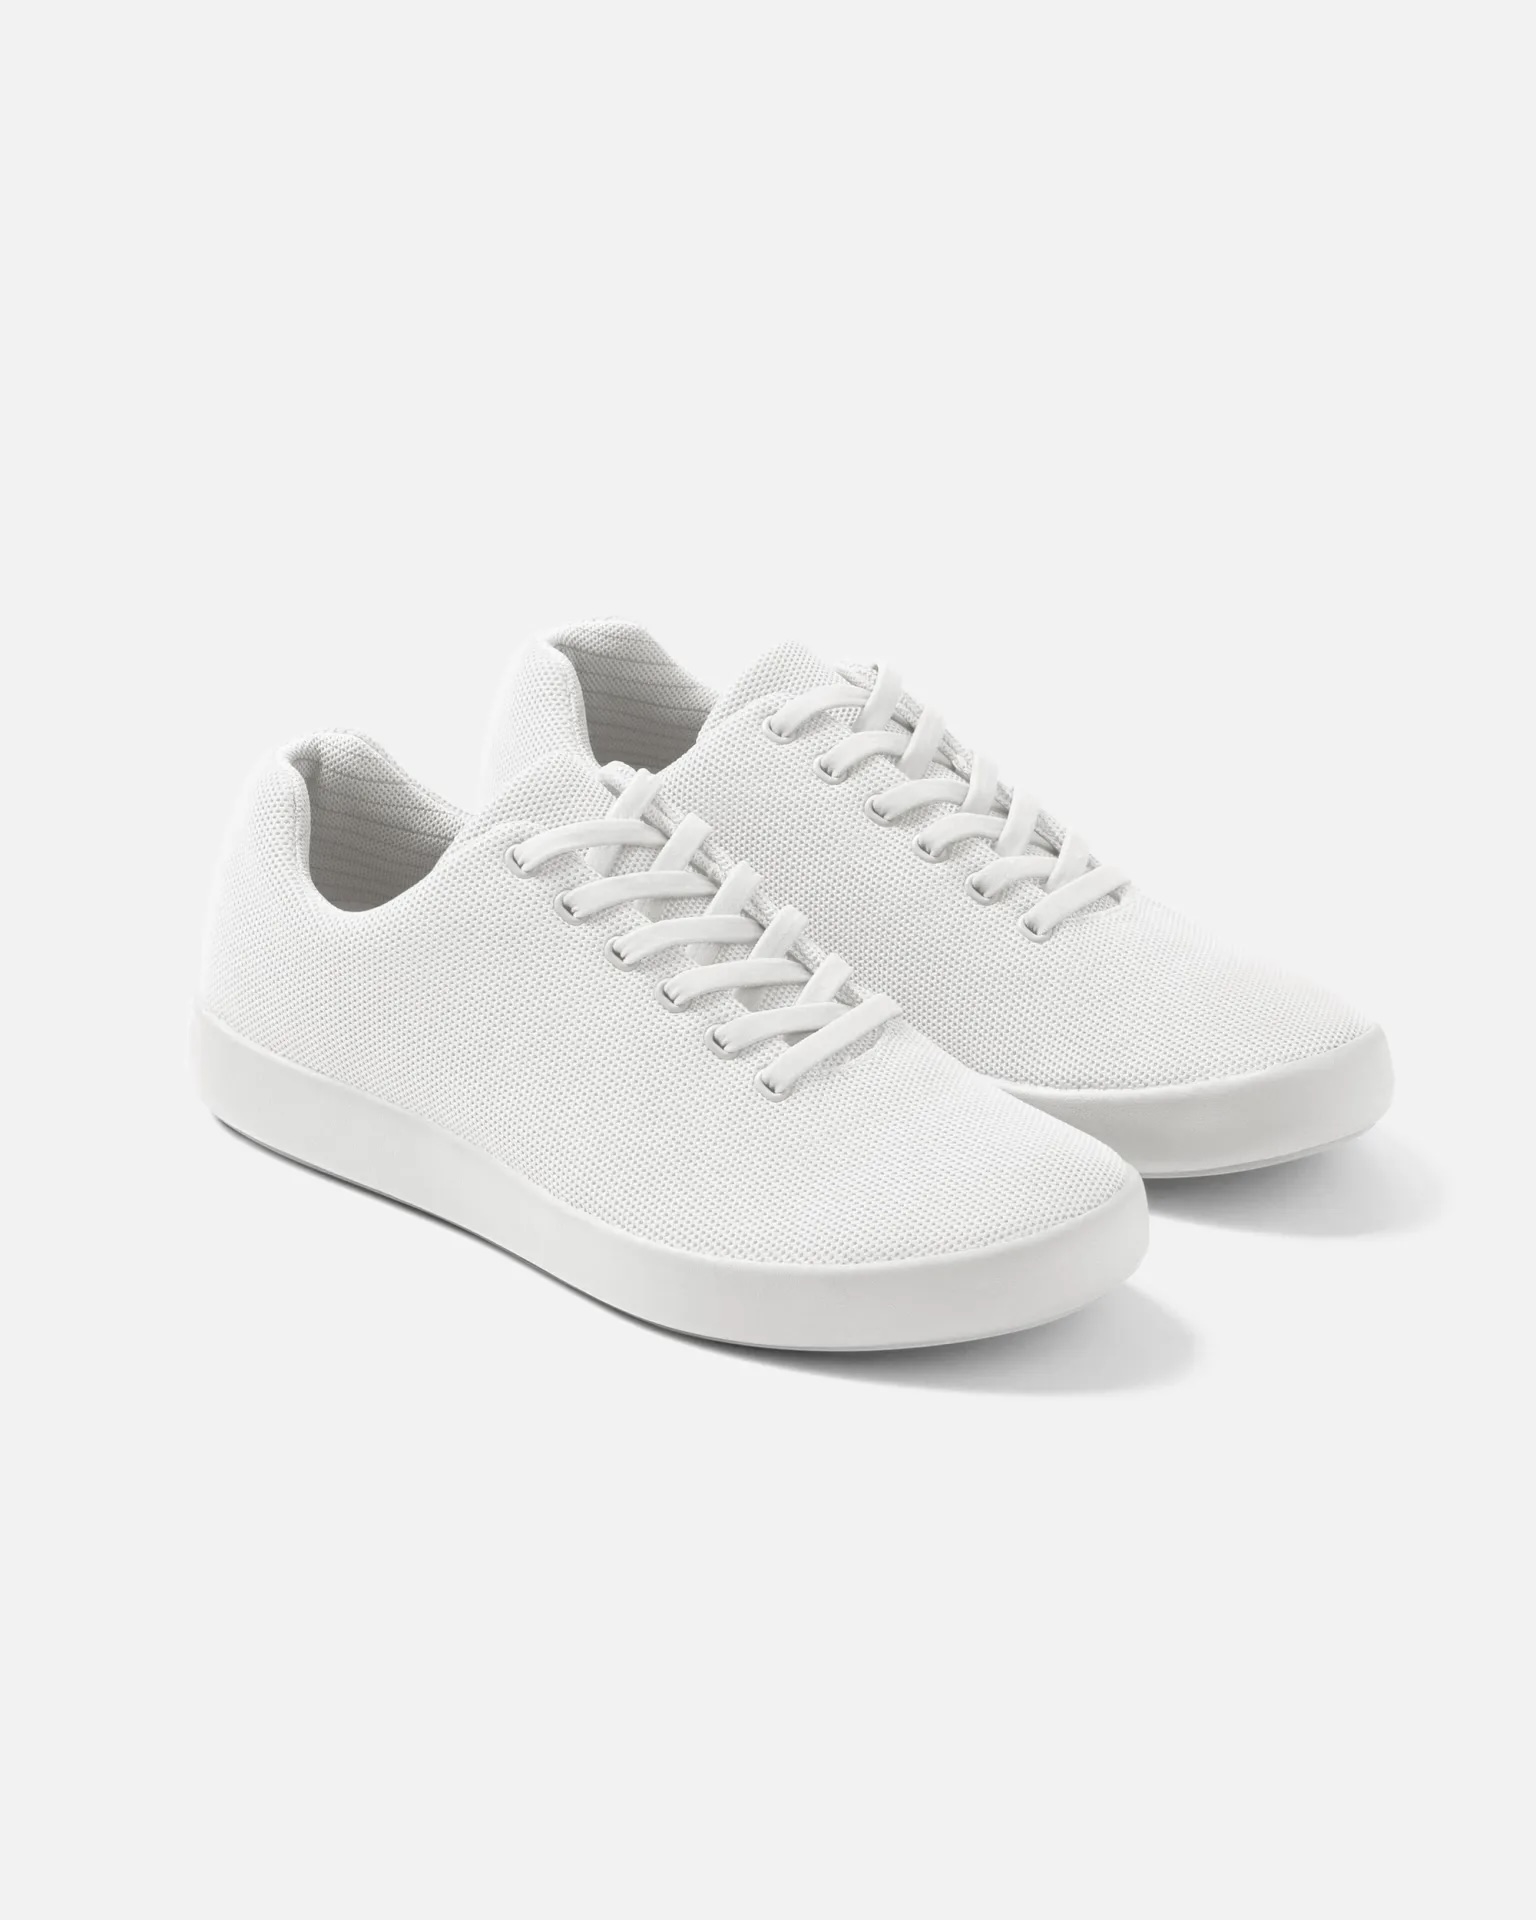 A pair of white lace-up sneakers on a plain background, suitable for versatile styling and shopping options